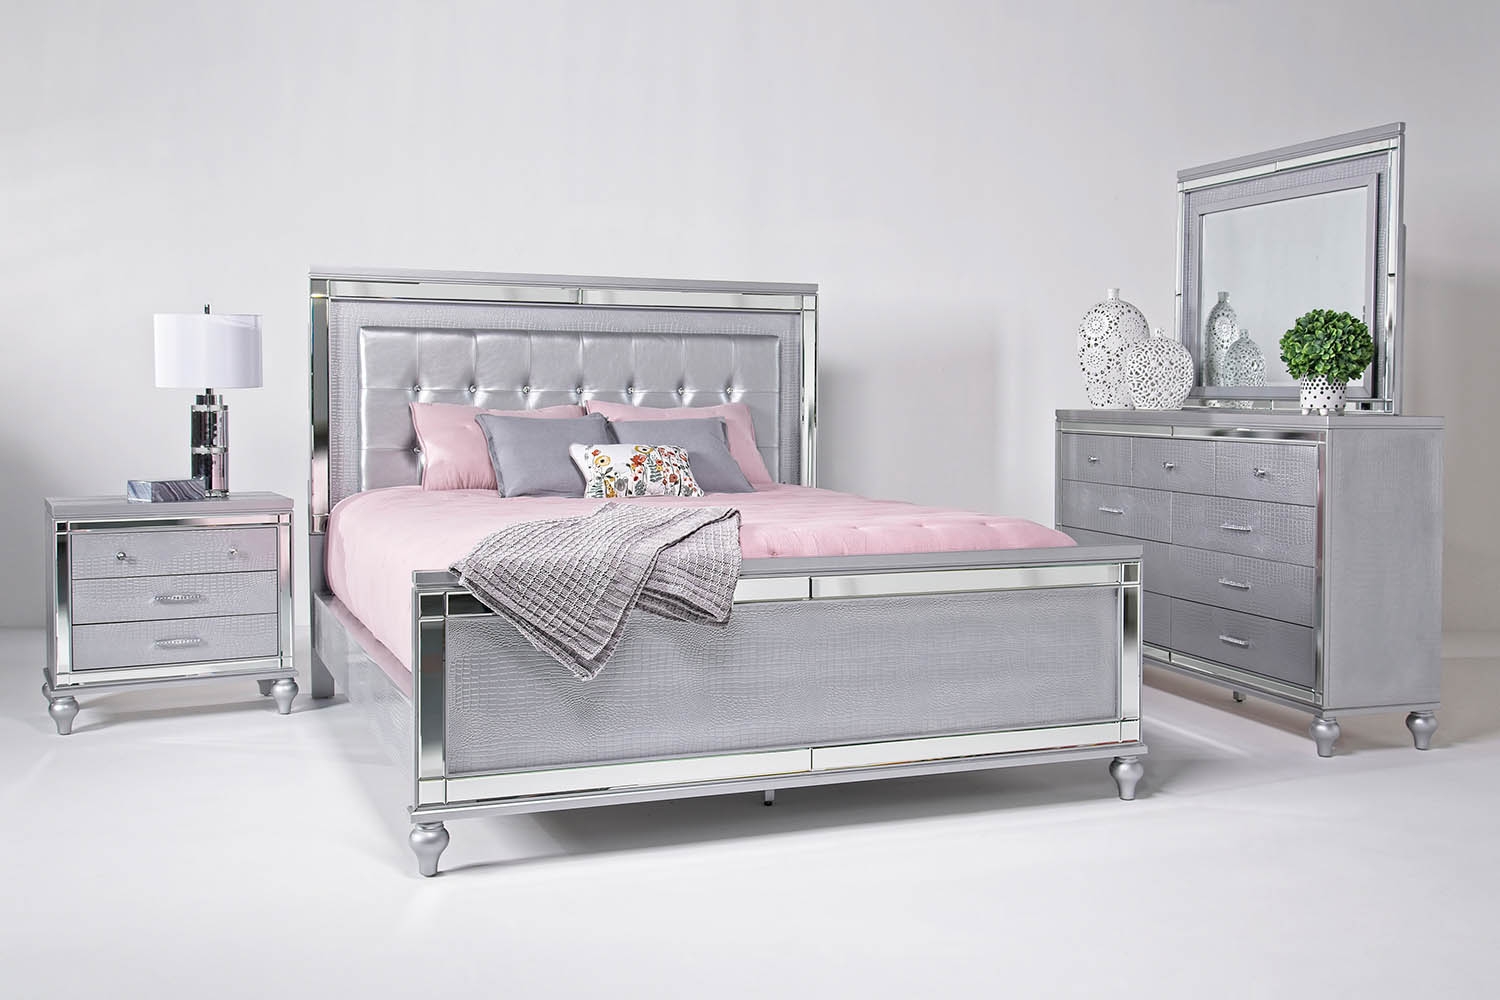 Valentino Panel Bed, Dresser, Mirror & Nightstand in Silver, Eastern King